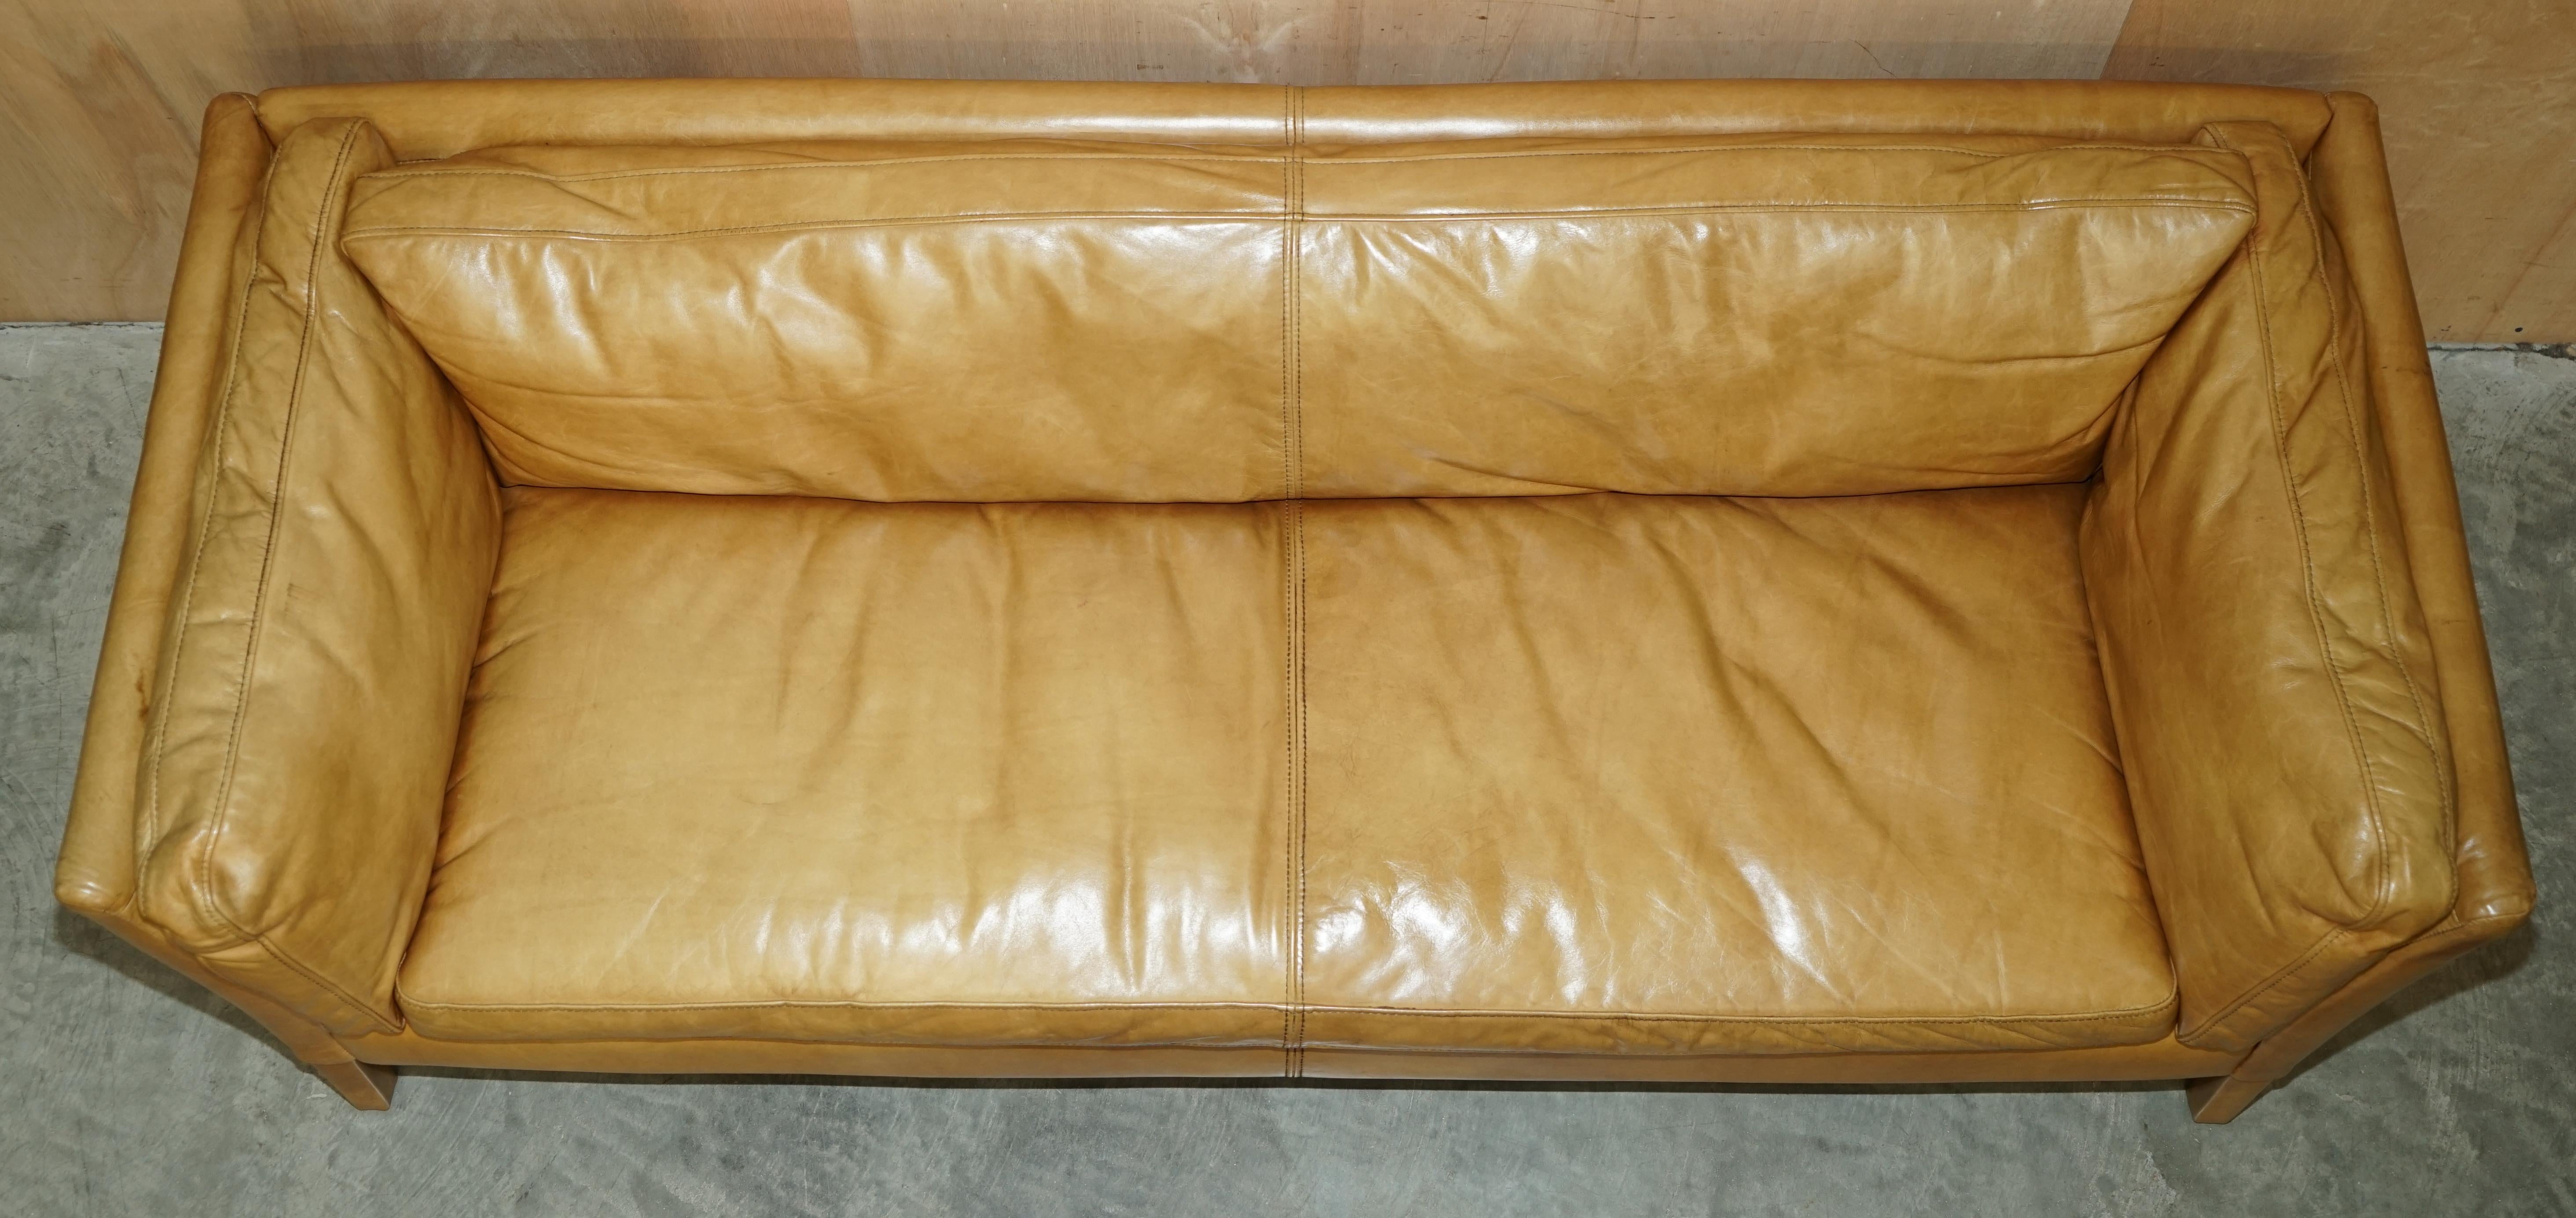 STYLiSH SUPER COMFORTABLE LARGE HALO GROUCHO TAN BROWN LEATHER THREE SEAT SOFA For Sale 3